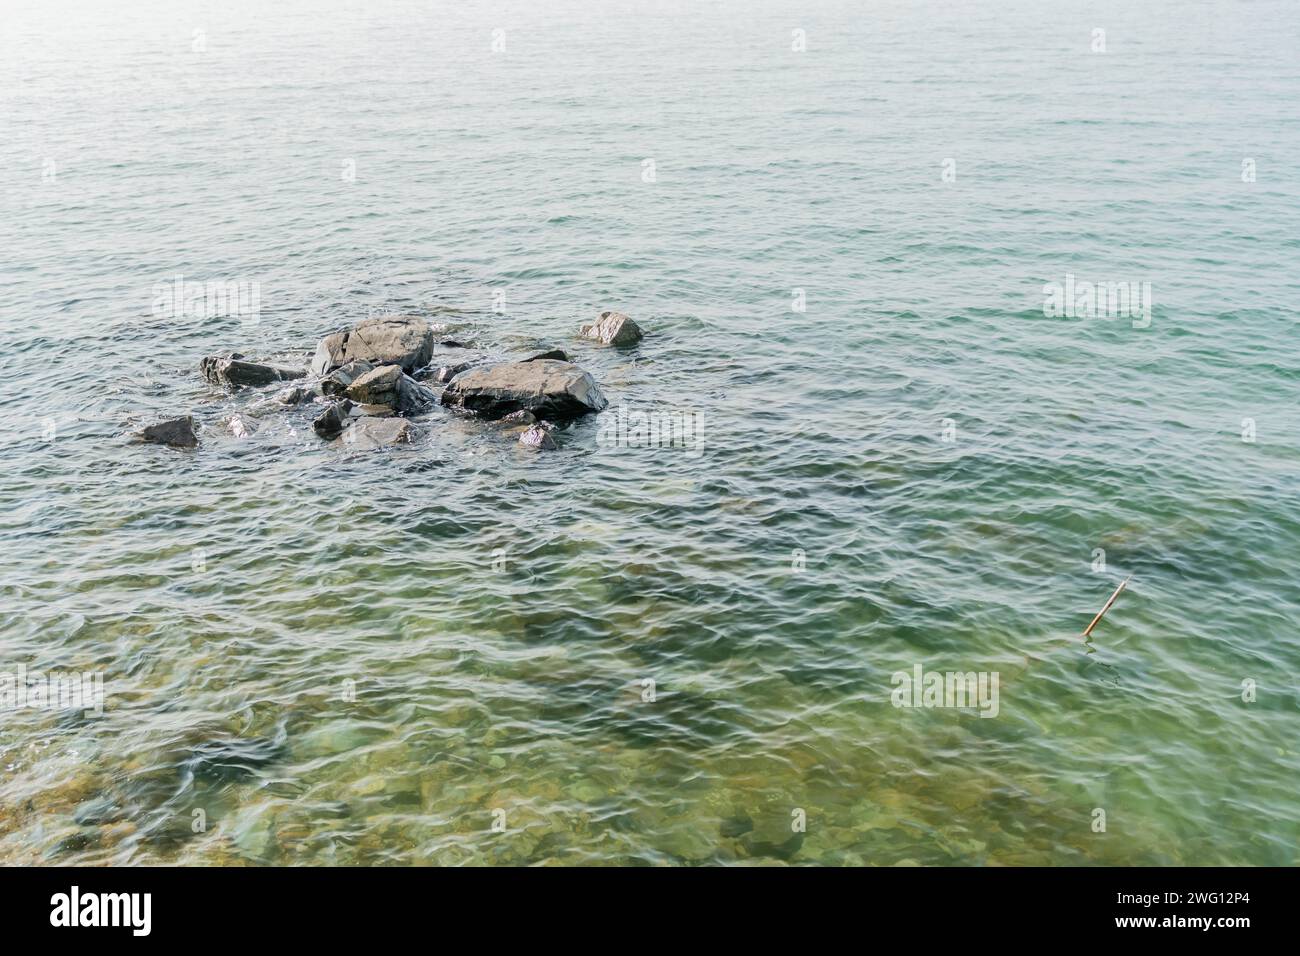 Waves lapping gently against large boulders at surface of water in Taean-gun, South Korea Stock Photo